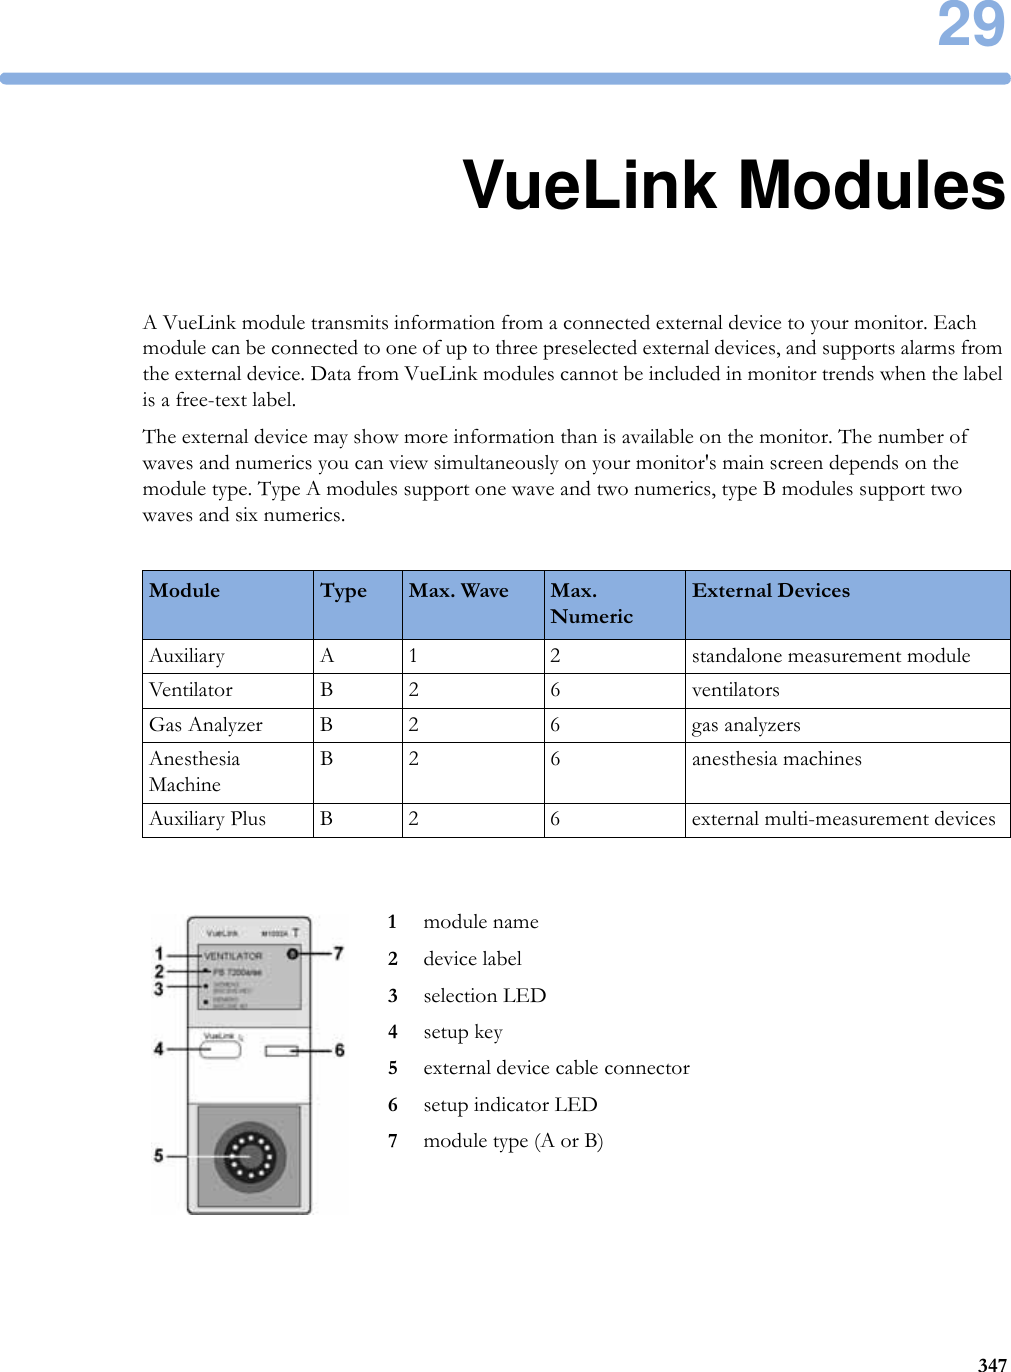 2934729VueLink ModulesA VueLink module transmits information from a connected external device to your monitor. Each module can be connected to one of up to three preselected external devices, and supports alarms from the external device. Data from VueLink modules cannot be included in monitor trends when the label is a free-text label.The external device may show more information than is available on the monitor. The number of waves and numerics you can view simultaneously on your monitor&apos;s main screen depends on the module type. Type A modules support one wave and two numerics, type B modules support two waves and six numerics.Module Type Max. Wave Max. NumericExternal DevicesAuxiliary A 1 2 standalone measurement moduleVentilator B 2 6 ventilatorsGas Analyzer B 2 6 gas analyzersAnesthesia MachineB 2 6 anesthesia machinesAuxiliary Plus B 2 6 external multi-measurement devices1module name2device label3selection LED4setup key5external device cable connector6setup indicator LED7module type (A or B)